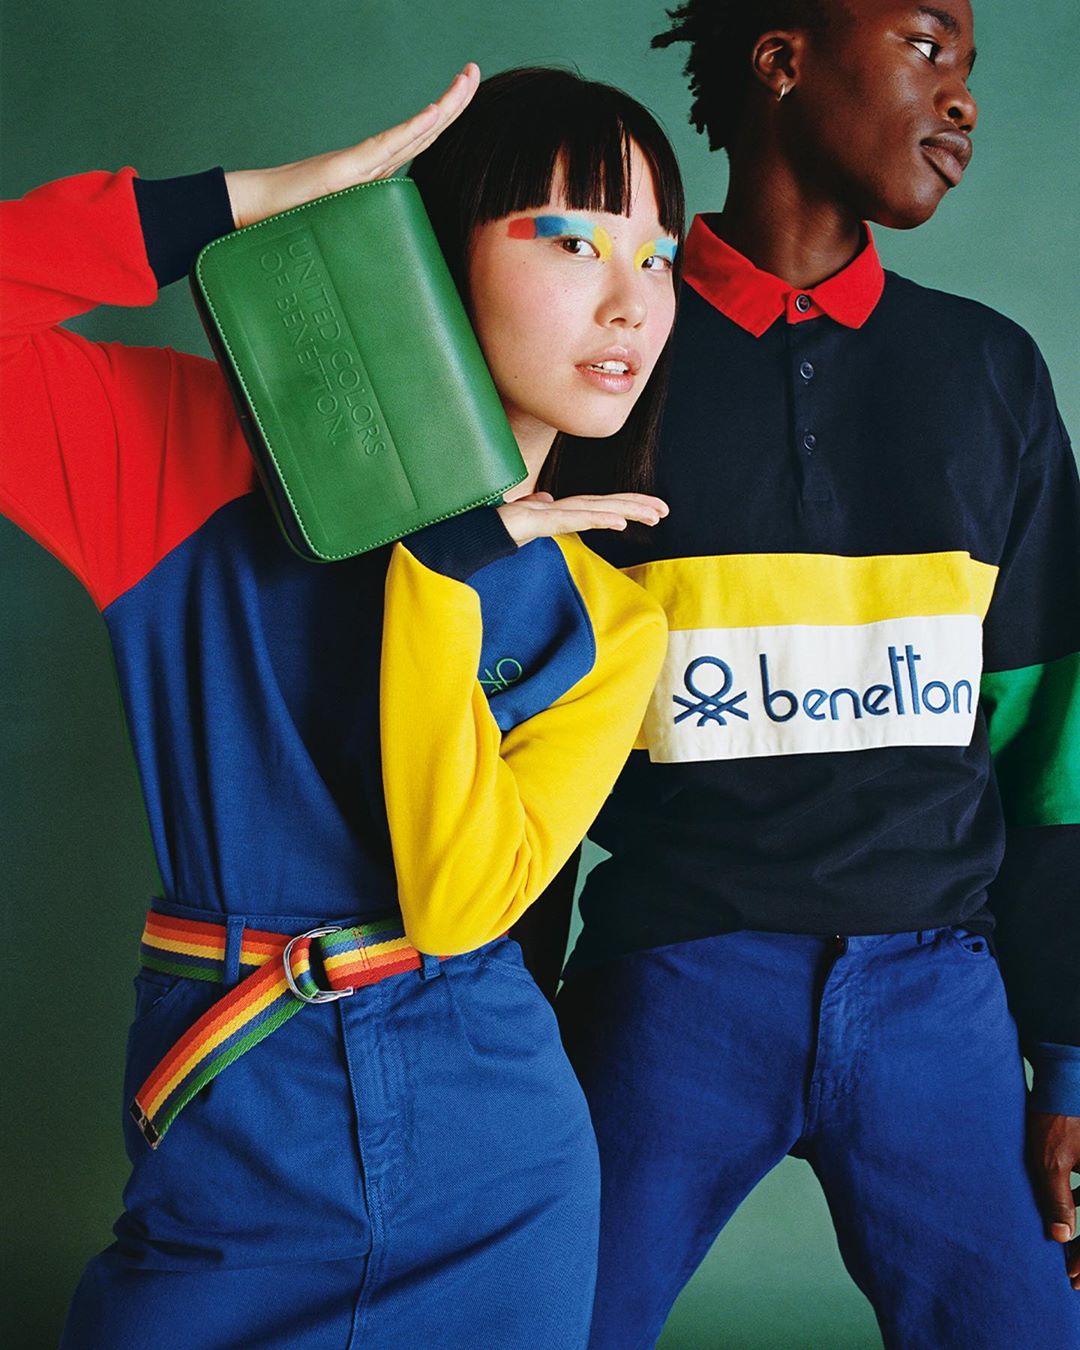 United Colors of Benetton - Waiting for colors to call.
#Benetton #FW20 @jcdecastelbajac